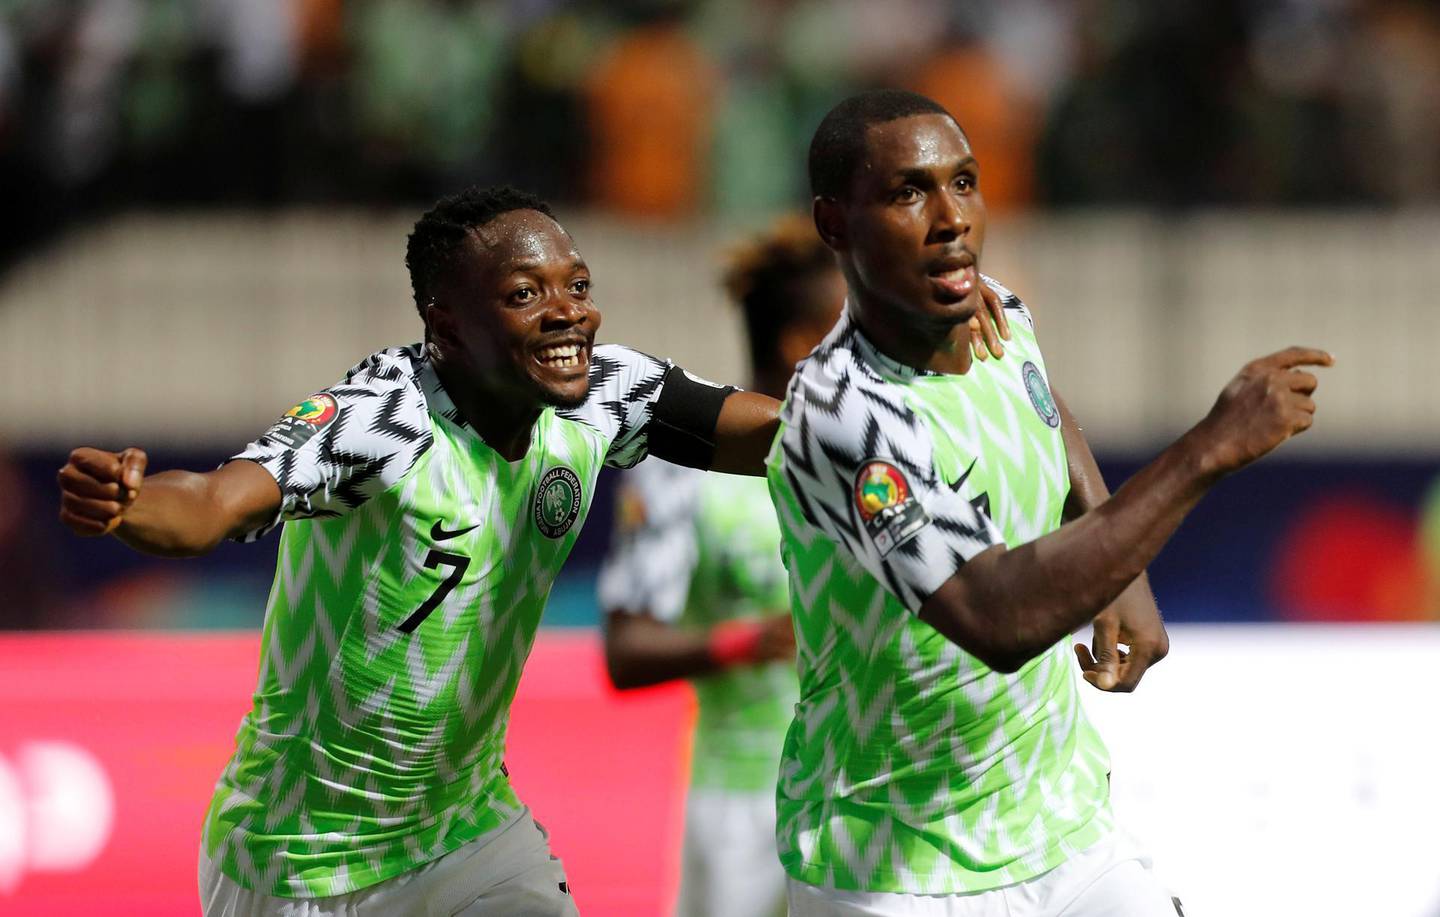 FILE PHOTO: Soccer Football - Africa Cup of Nations 2019 - Round of 16 - Nigeria v Cameroon - Alexandria Stadium, Alexandria, Egypt - July 6, 2019  Nigeria's Odion Ighalo celebrates scoring their second goal with Ahmed Musa     REUTERS/Mohamed Abd El Ghany/File Photo